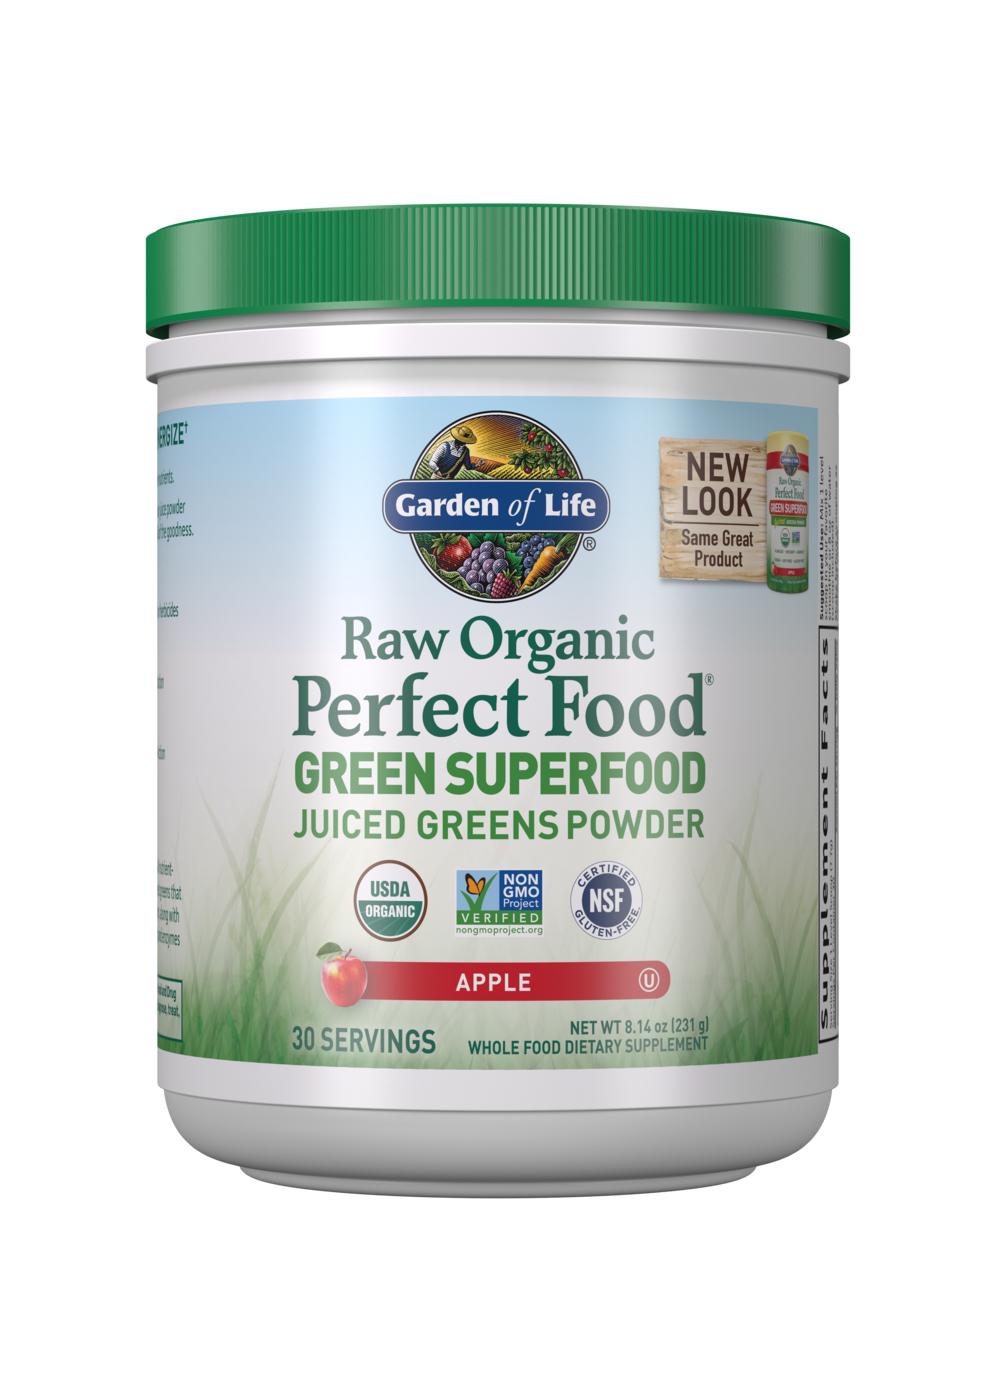 Garden of Life Raw Organic Perfect Food Green Superfood Juiced Greens Powder Apple Flavor; image 1 of 2